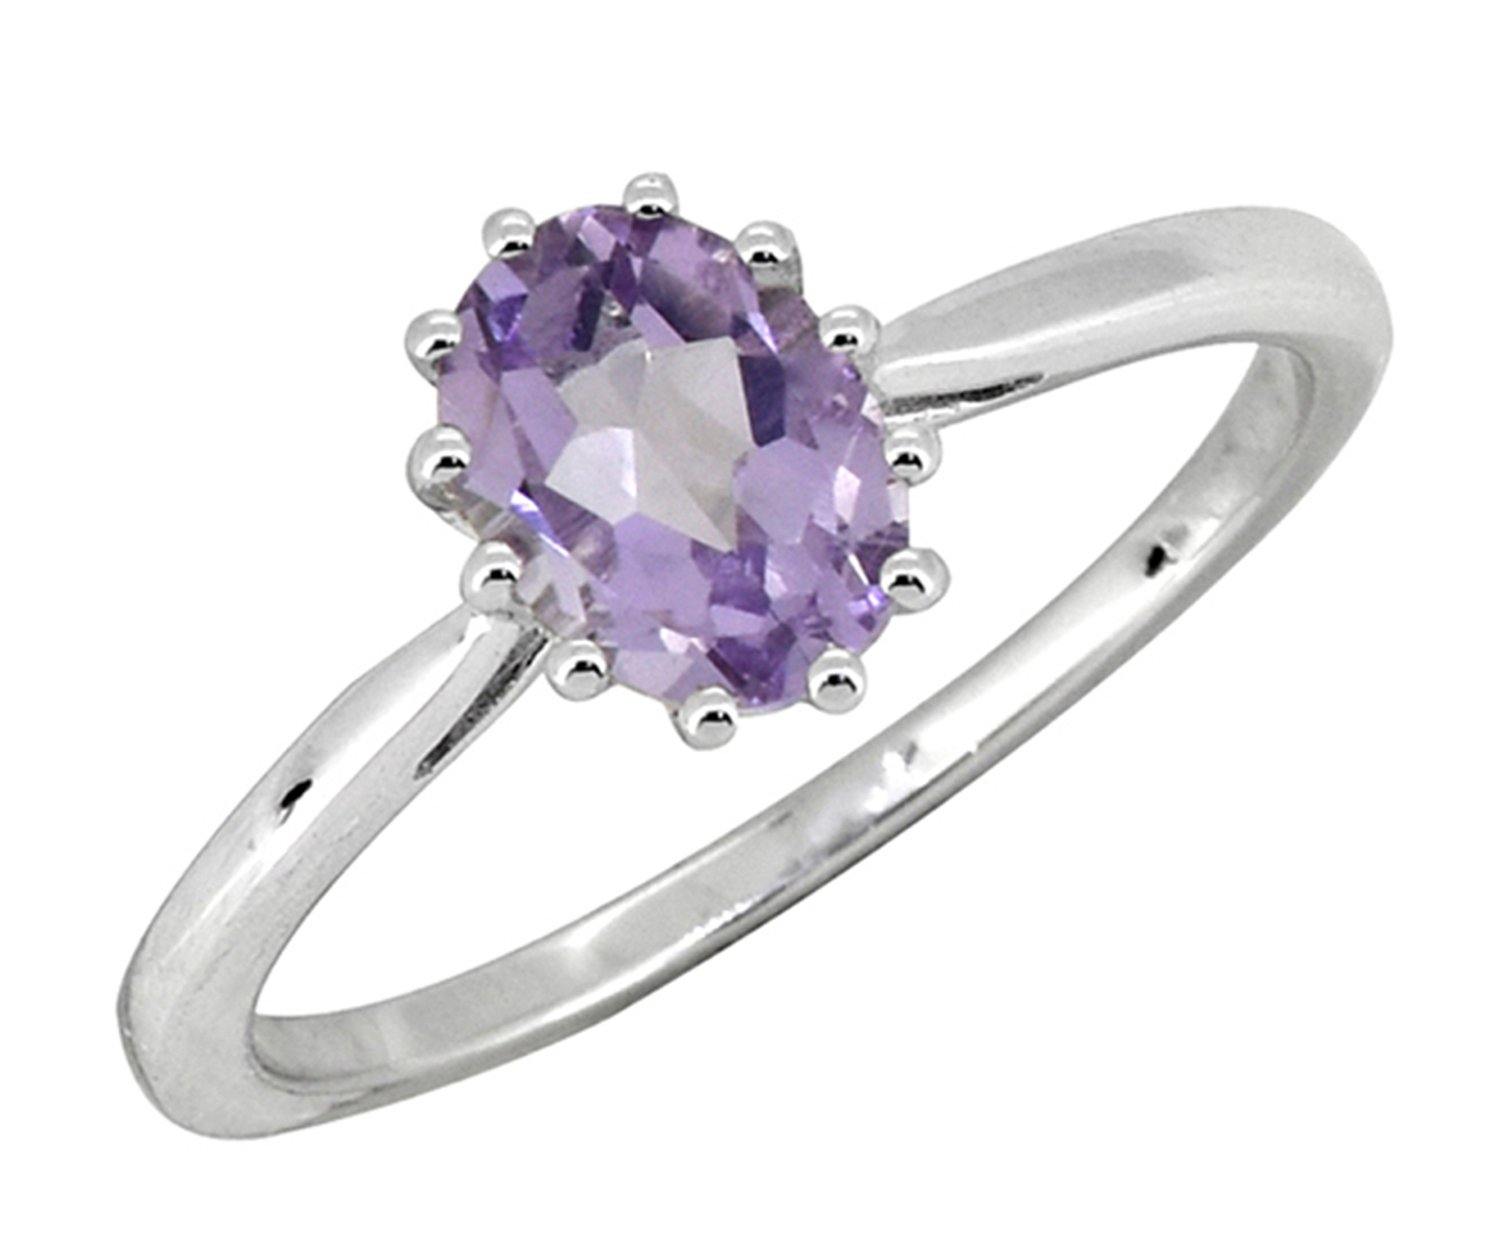 0.90 Ct. Pink Amethyst Solid 925 Sterling Silver Ring Jewelry - YoTreasure